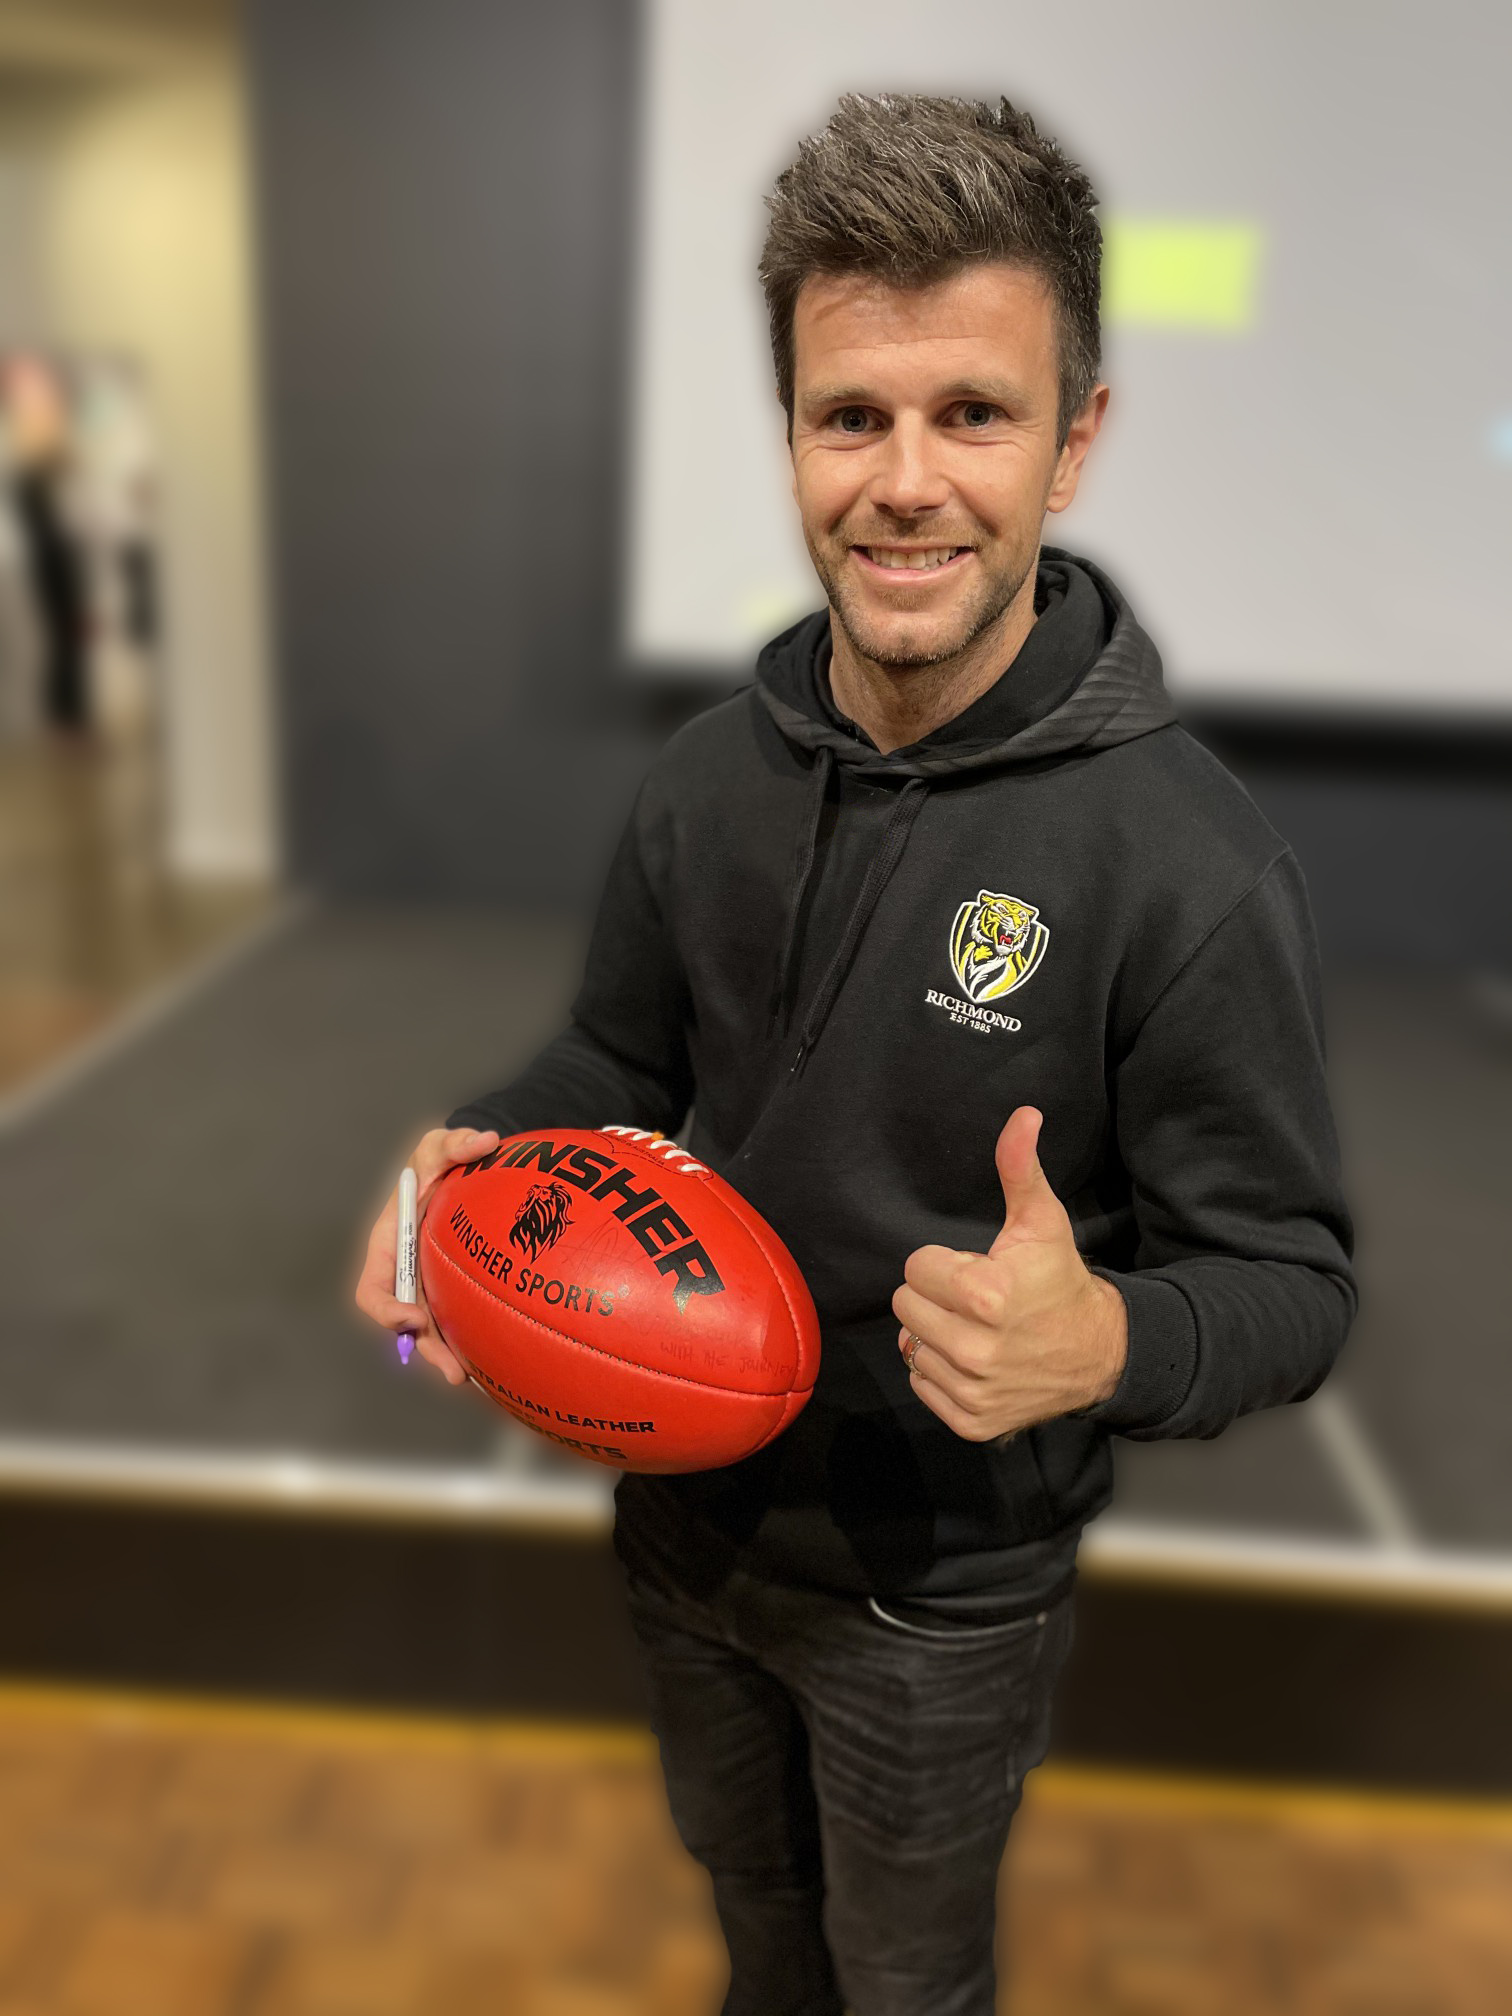 Winsher sports AFL Match Balls for Training and Match